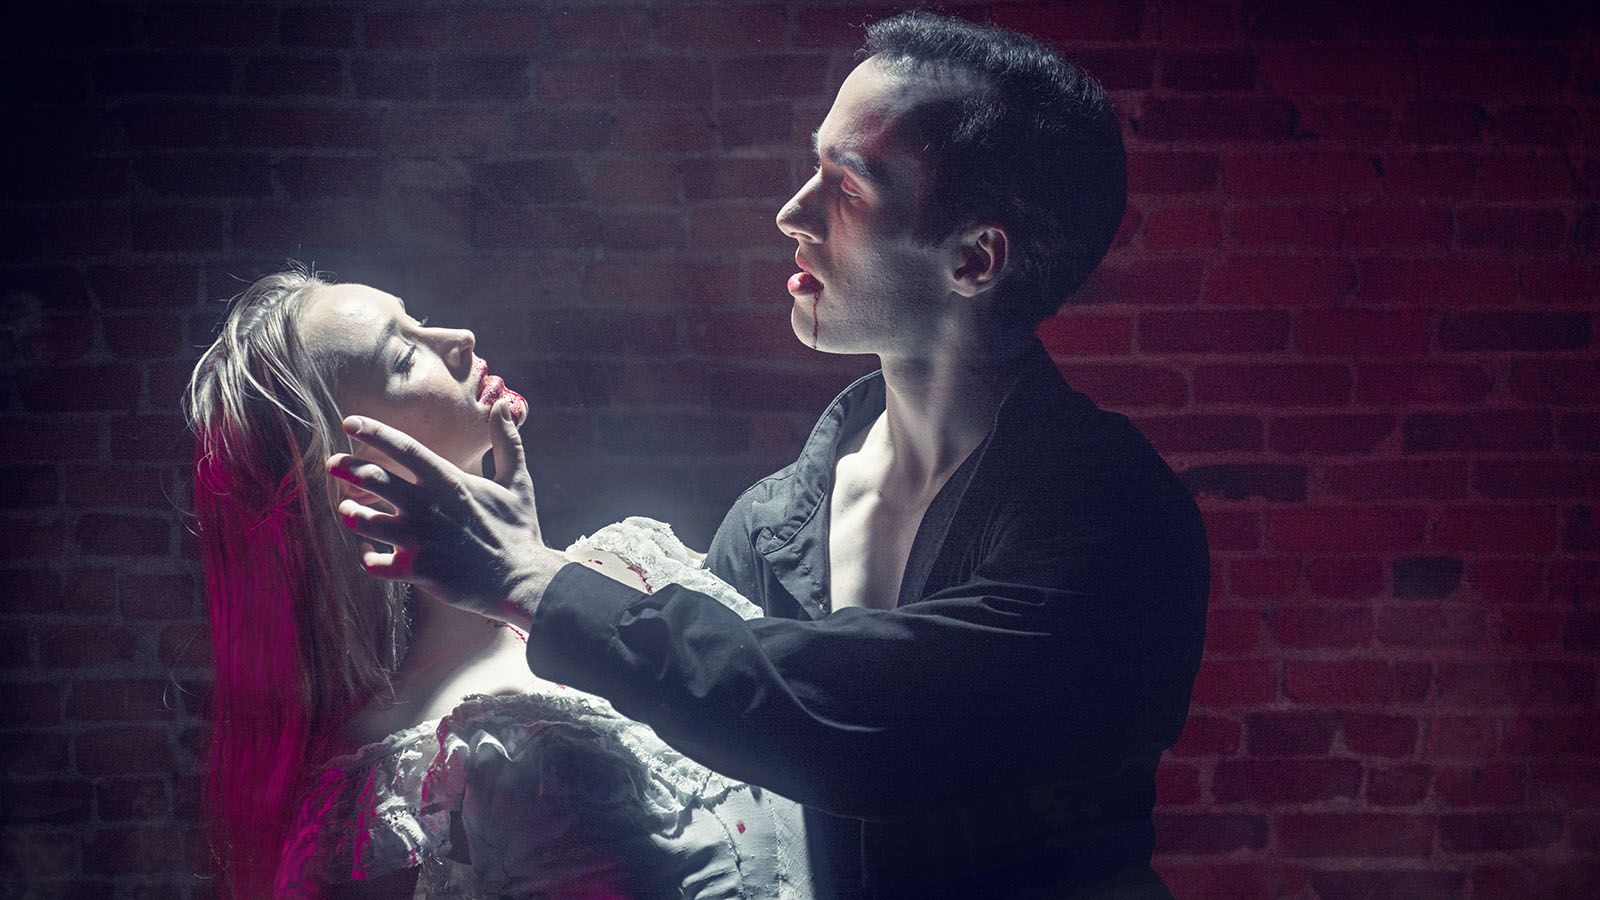 Fort Wayne Ballet will get you into the Halloween spirit with "Dracula."